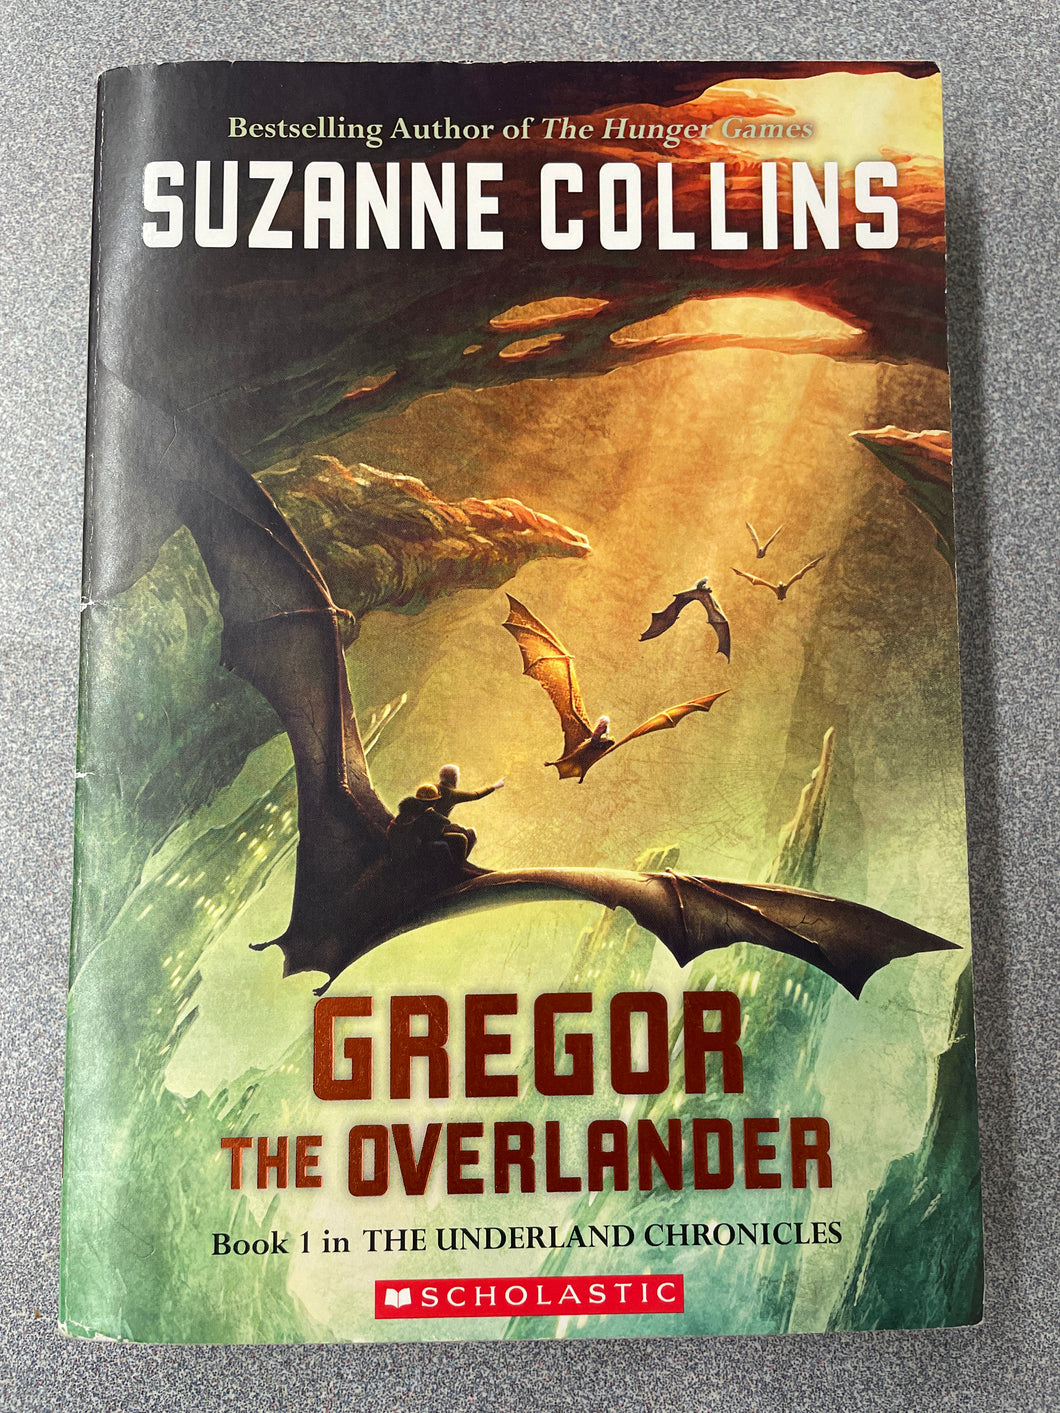 Collins, Suzanne, Gregor the Overlander: Book 1 in the Underland Chronicles [2003] YF 12/233